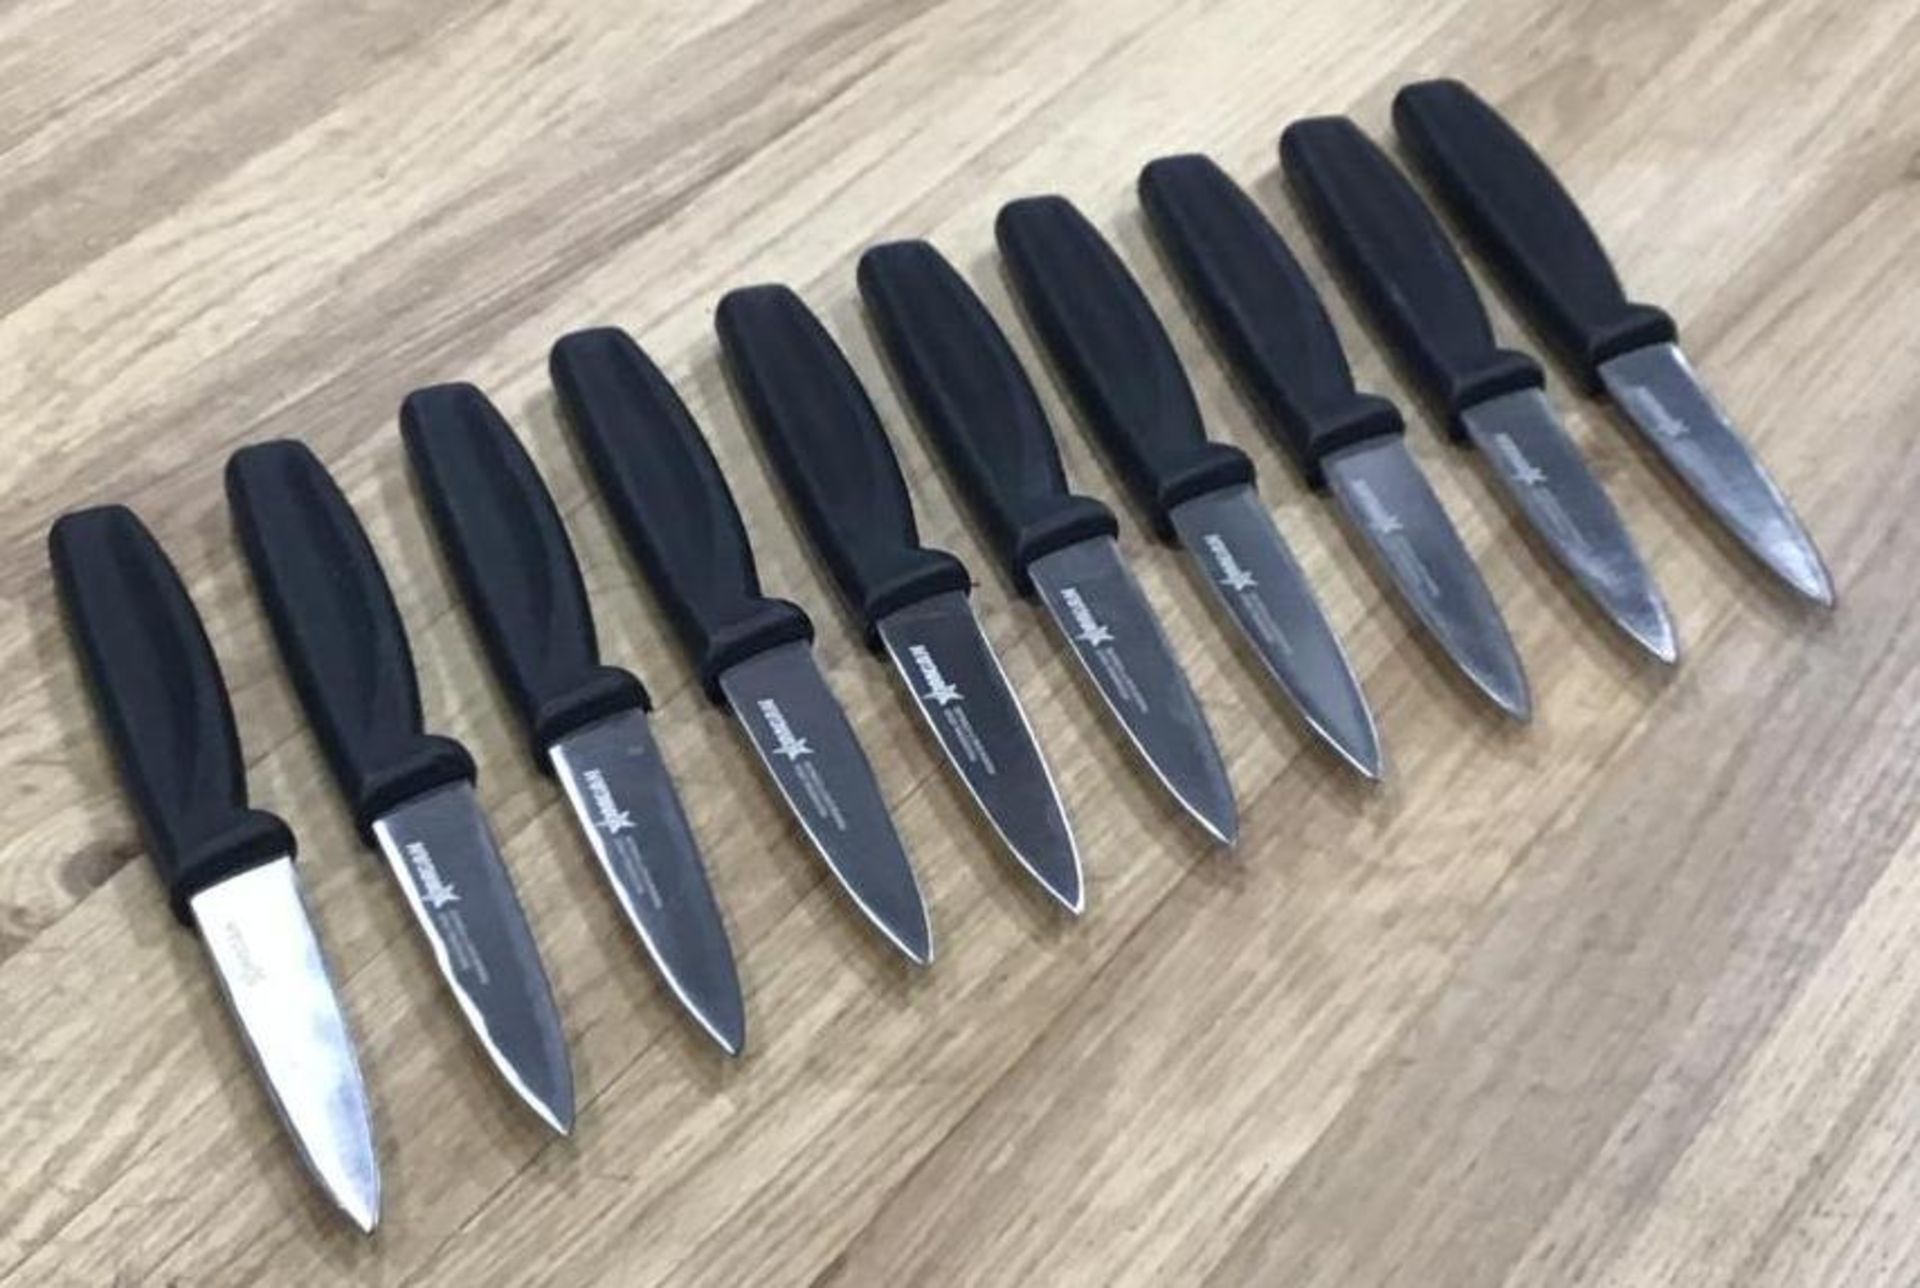 3.25" PARING KNIVES W/BLACK HANDLE - LOT OF 10